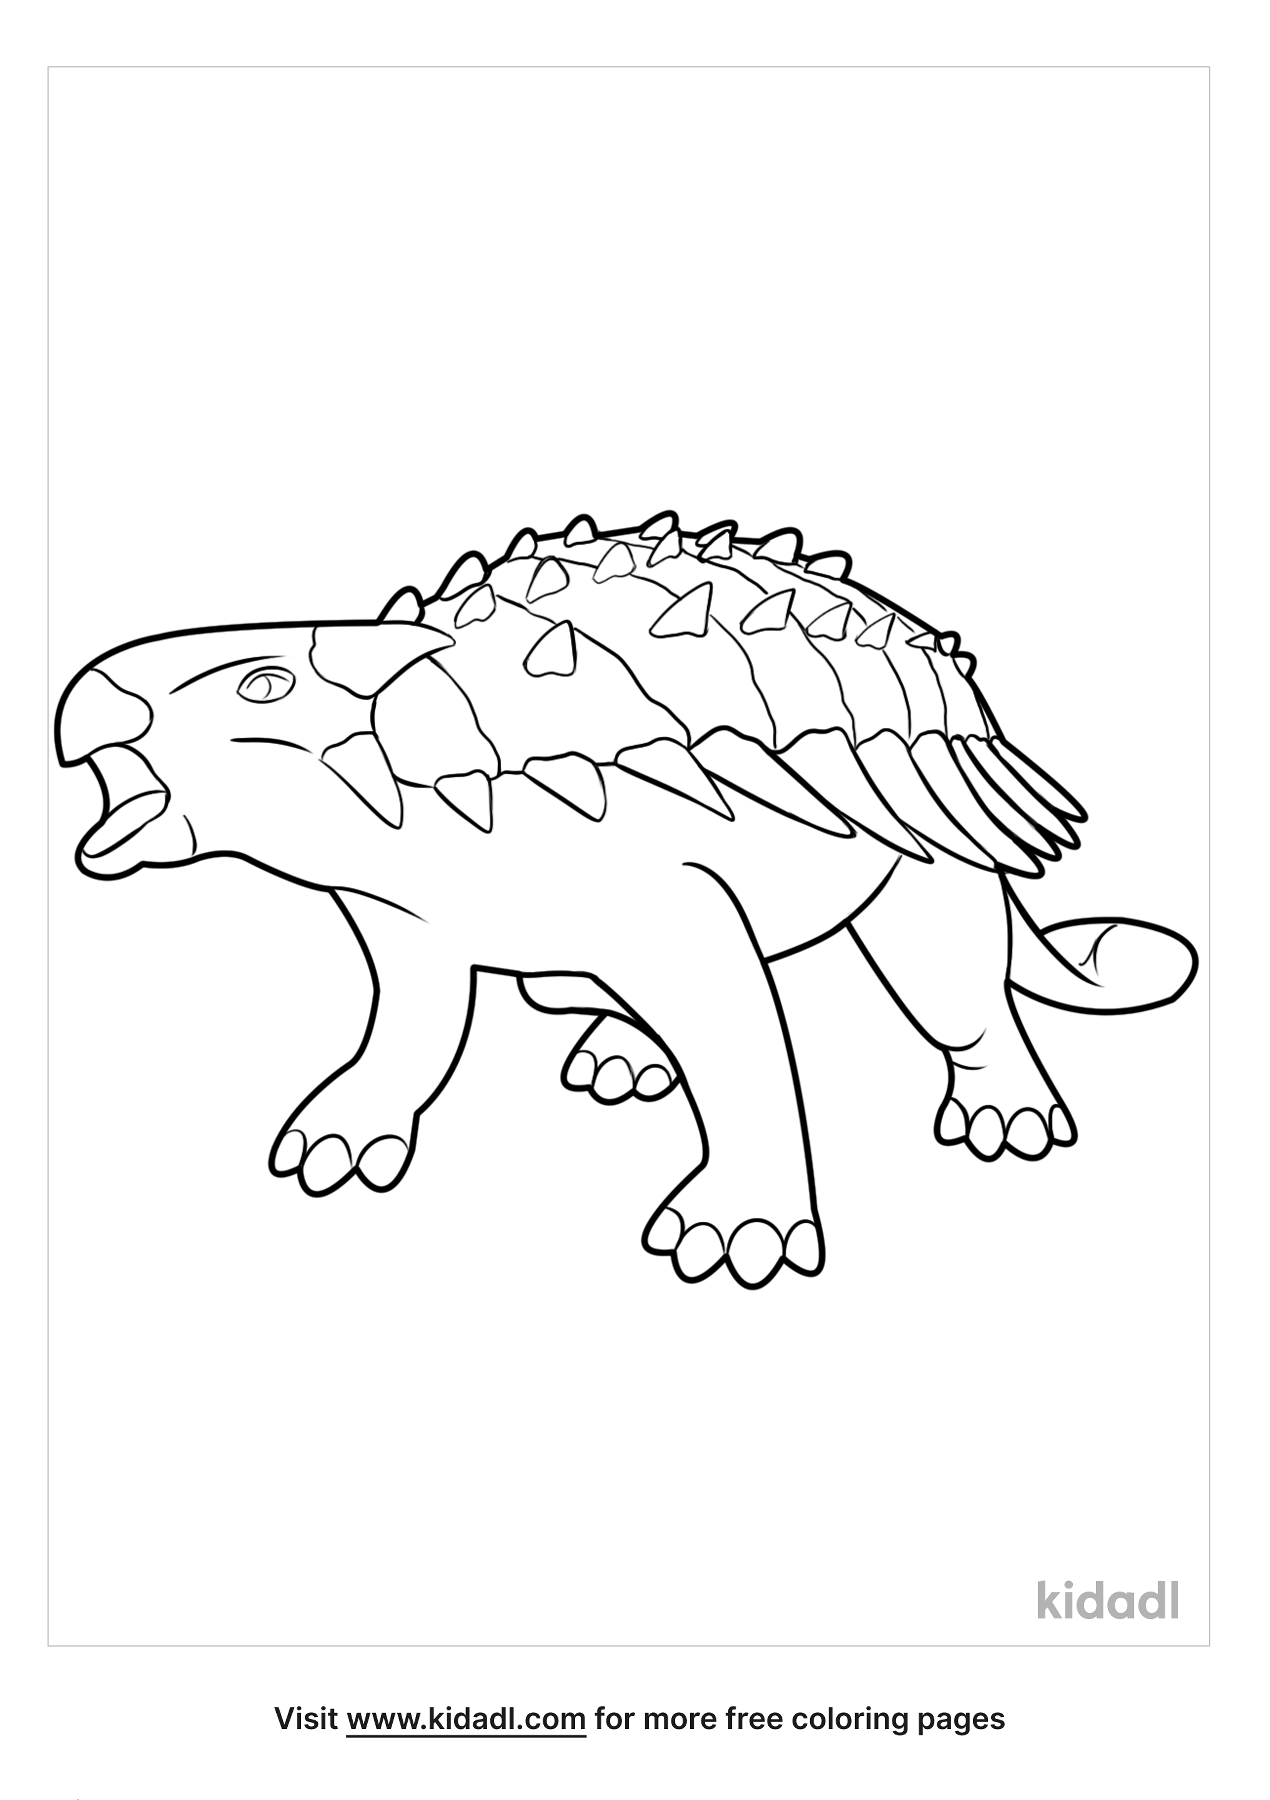 Ankylosaurus Coloring Pages | Free Dinosaurs Coloring Pages | Kidadl